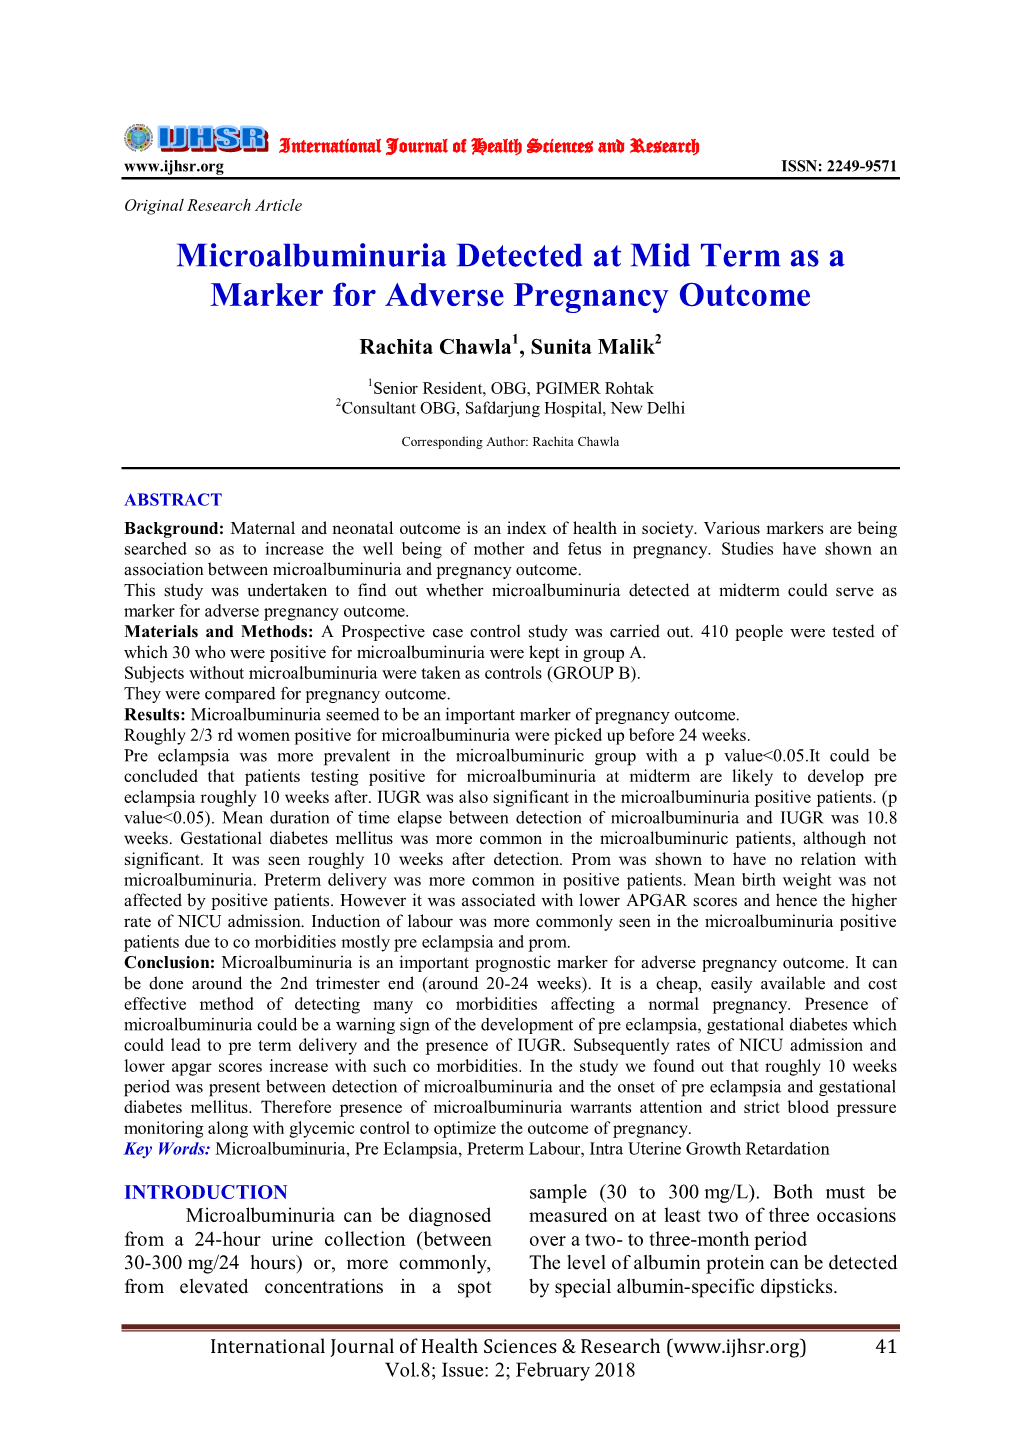 Microalbuminuria Detected at Mid Term As a Marker for Adverse Pregnancy Outcome